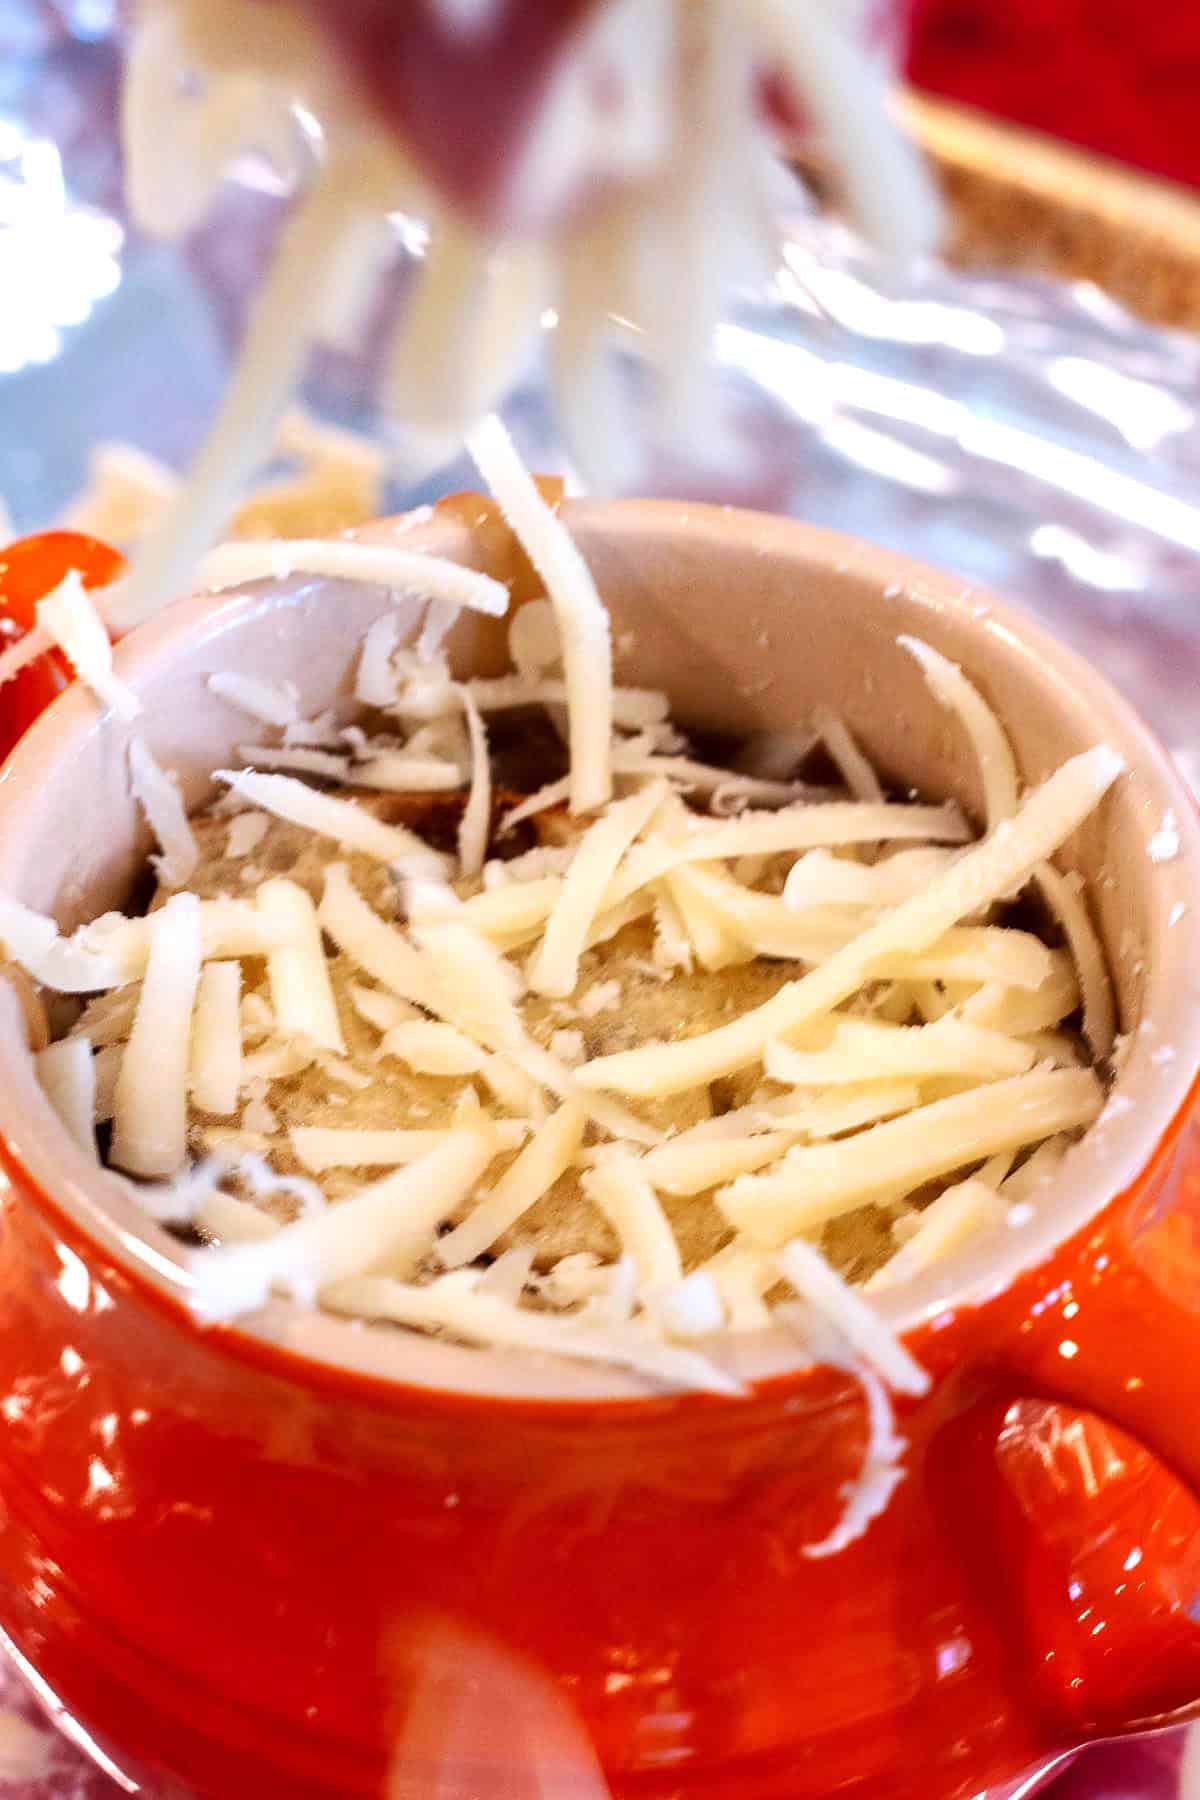 A small red soup pot with grated Swiss cheese being sprinkled on top.